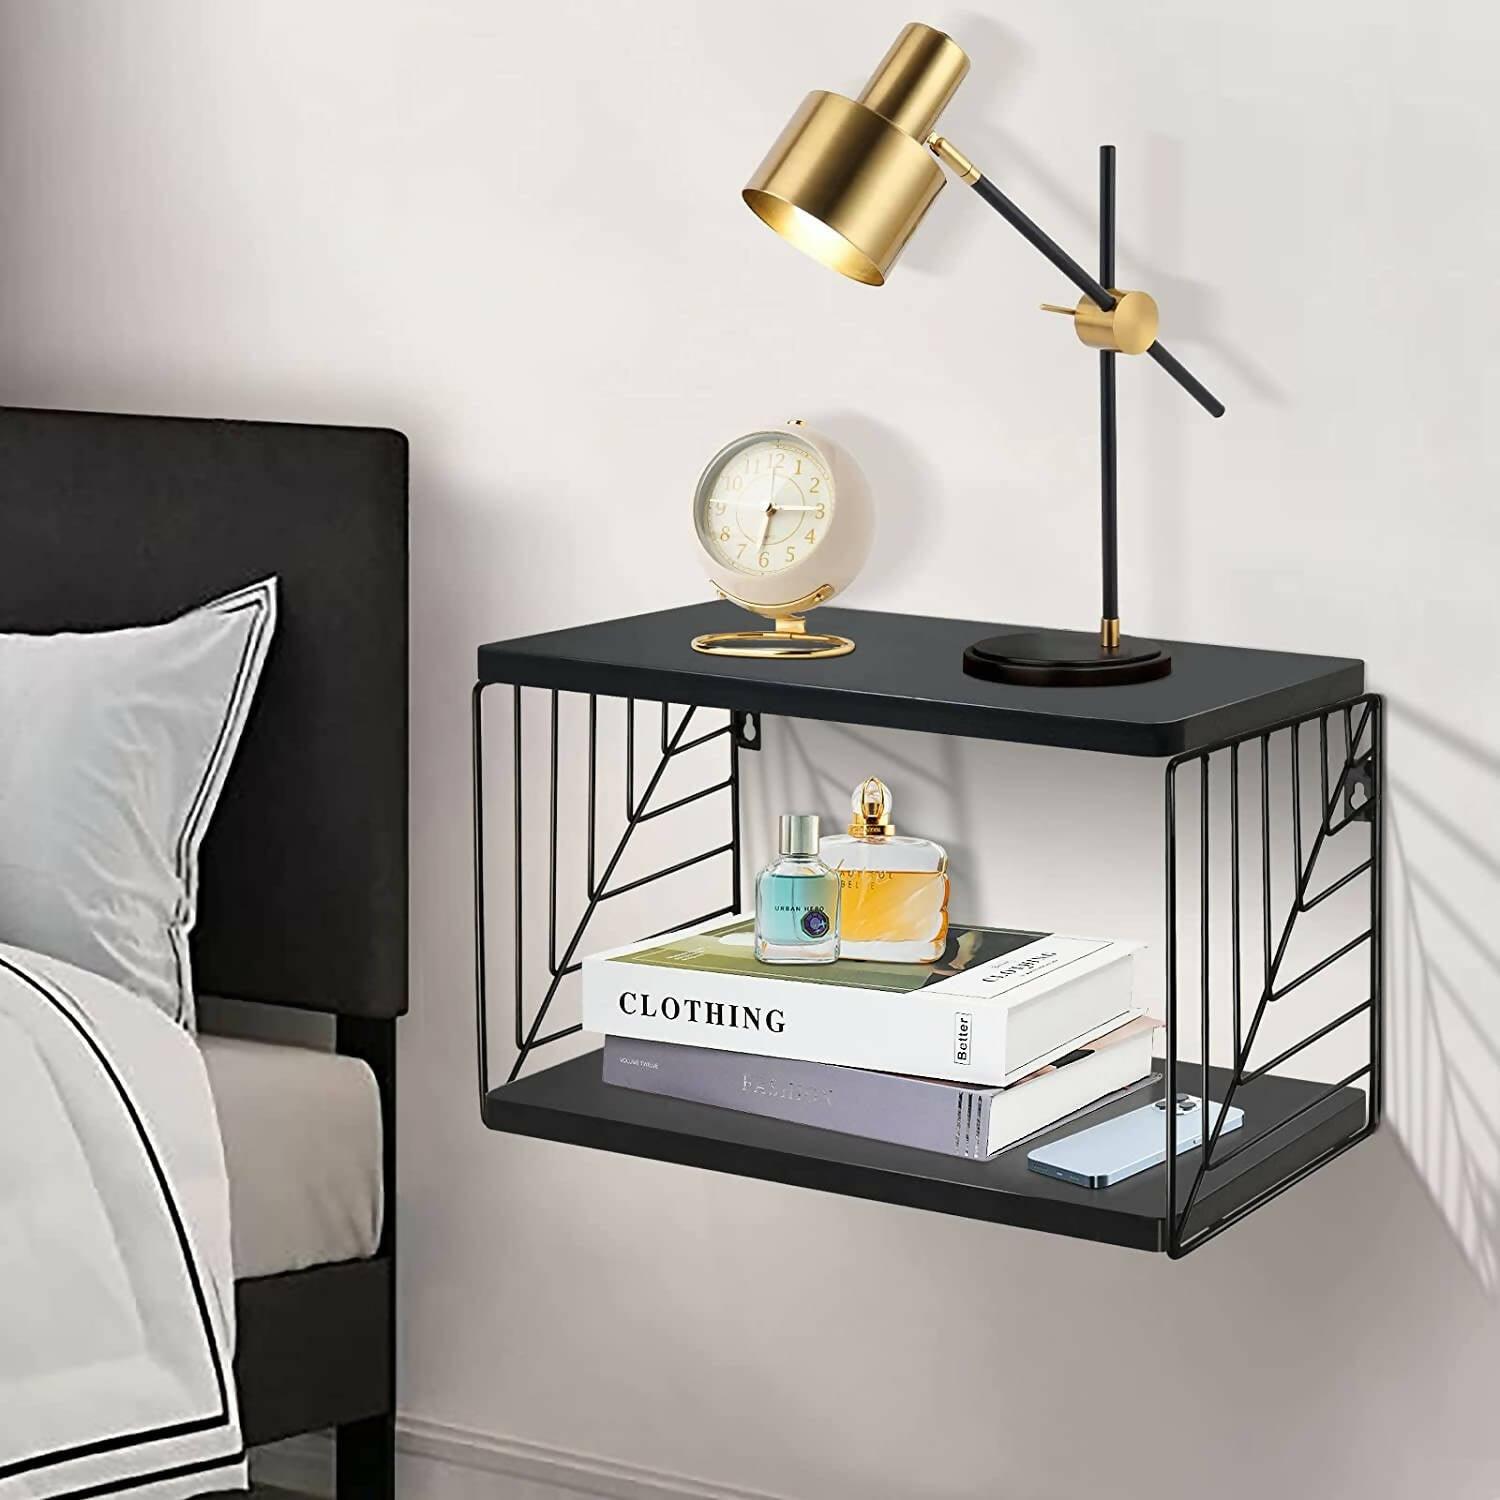 Night Stand Unistyle Floating- Modern Black Wall Mounted Nightstand 2 Tier Floating Wall Shelf Floating Shelves - ValueBox